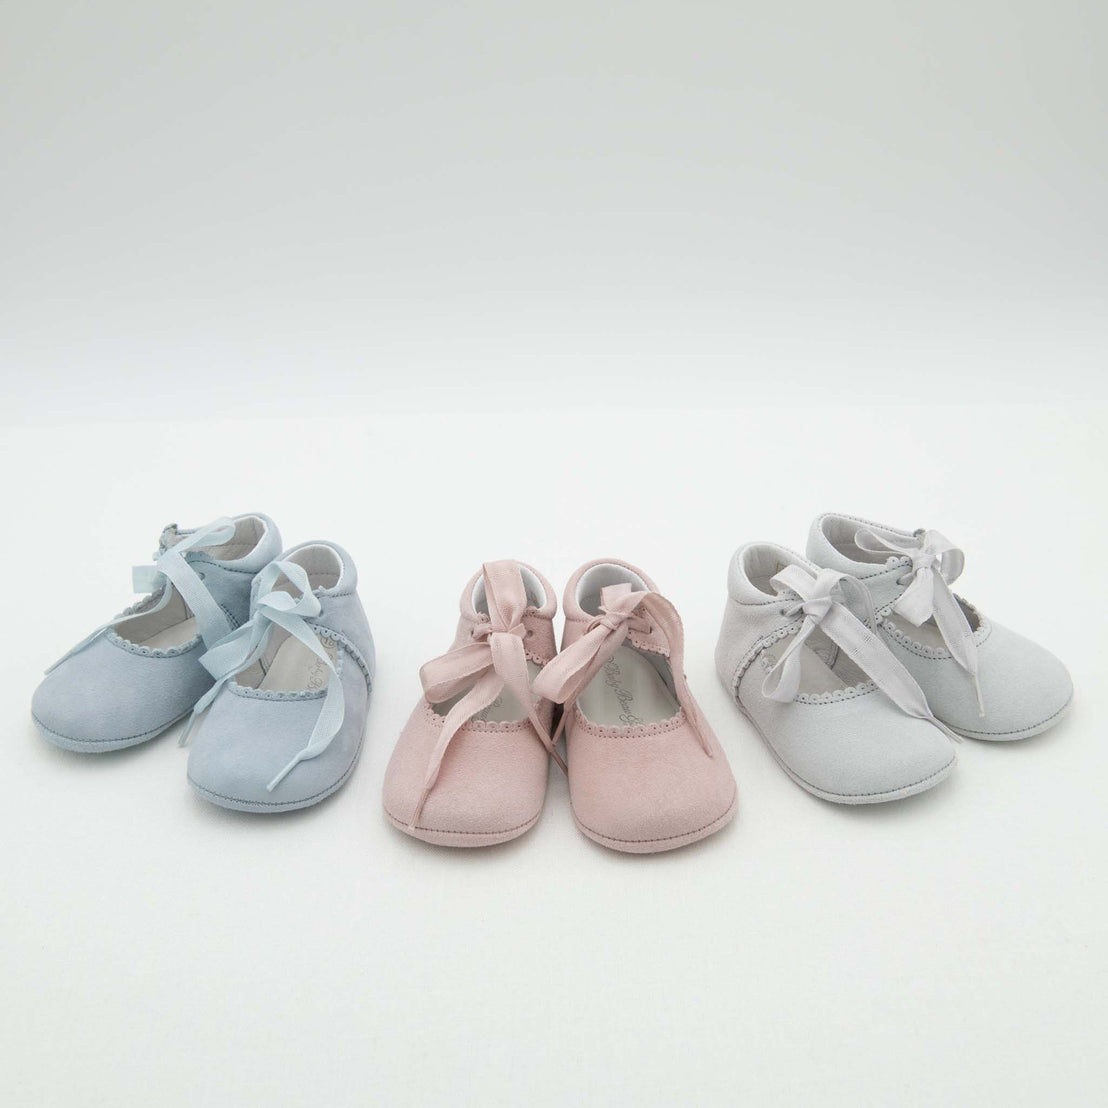 Three pairs of Thea Suede Tie Mary Janes in blue, pink, and gray, displayed in a row on a light background. Each pair features ribbon ties and decorative edges.